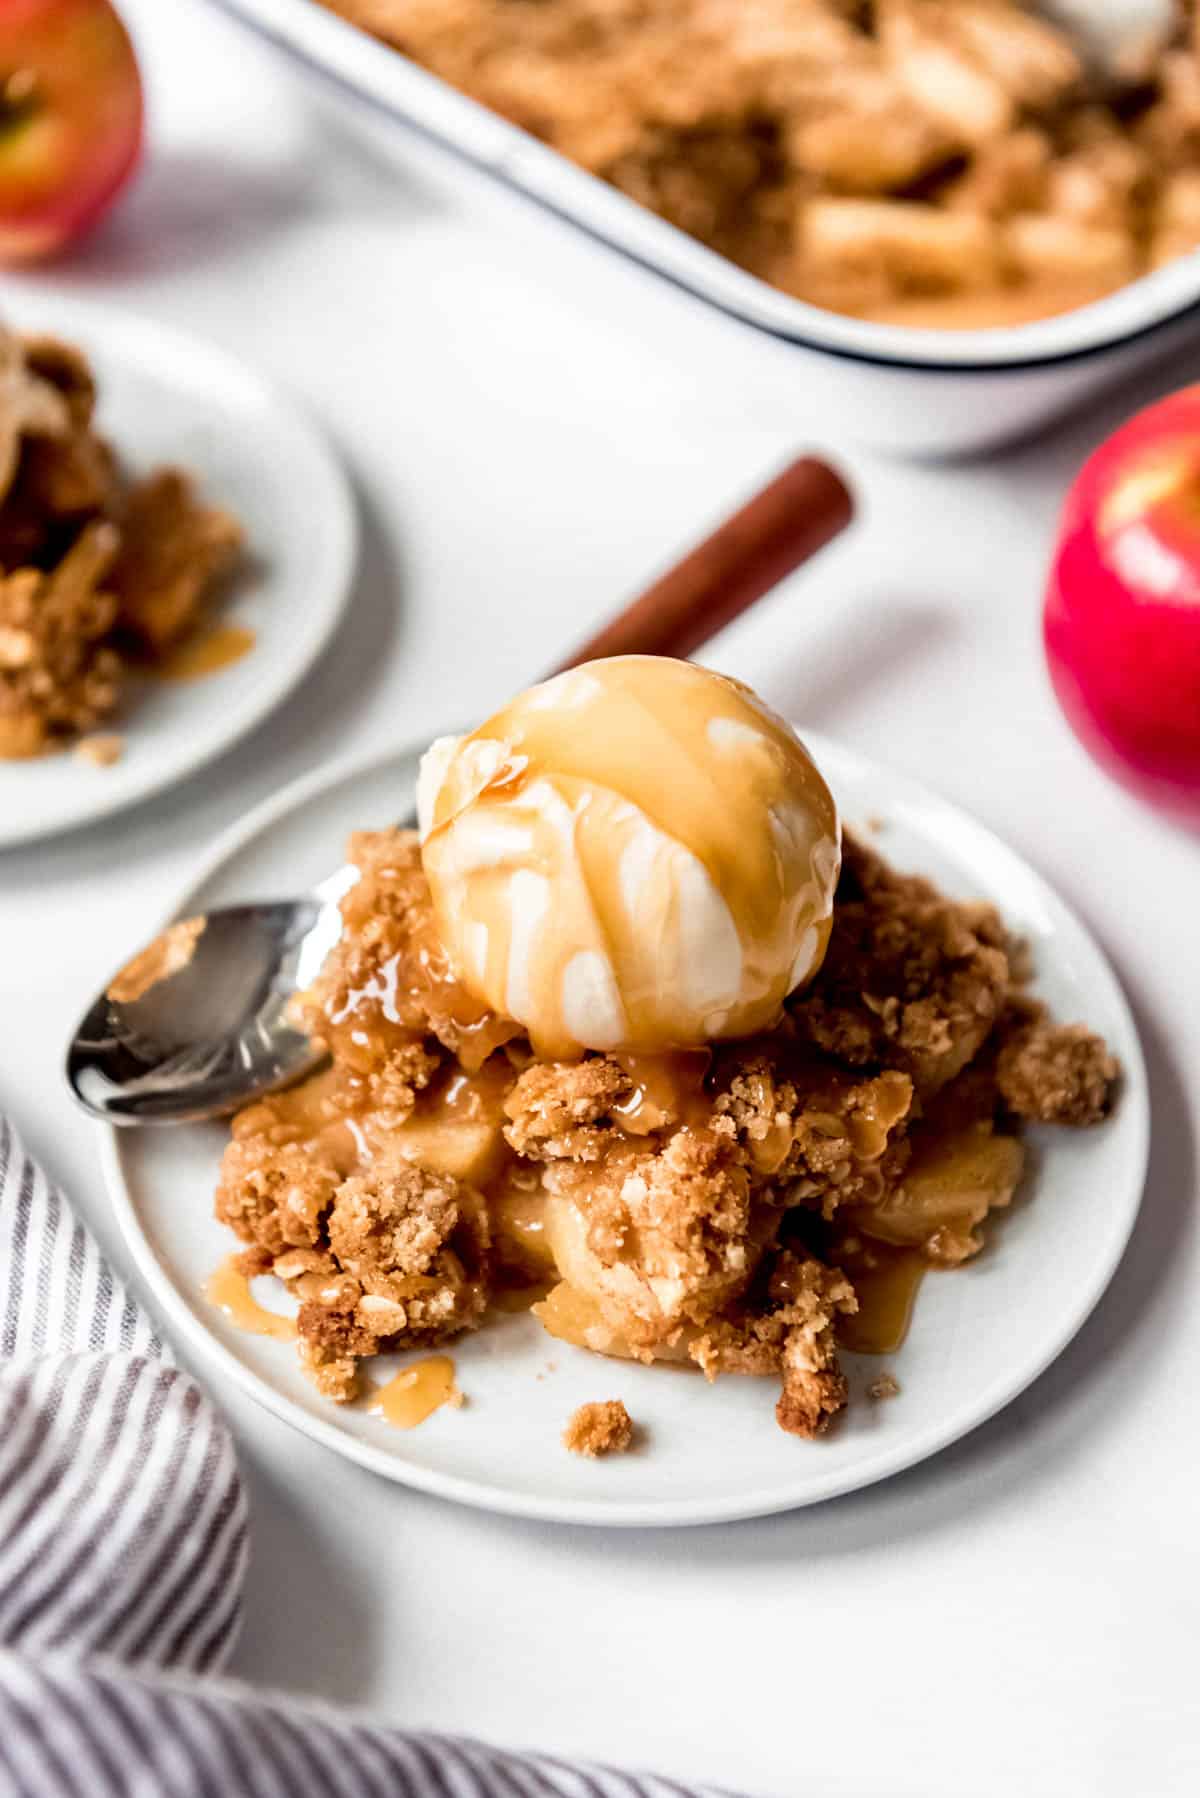 A serving of apple crisp on a dessert plate with ice cream and caramel syrup on top.